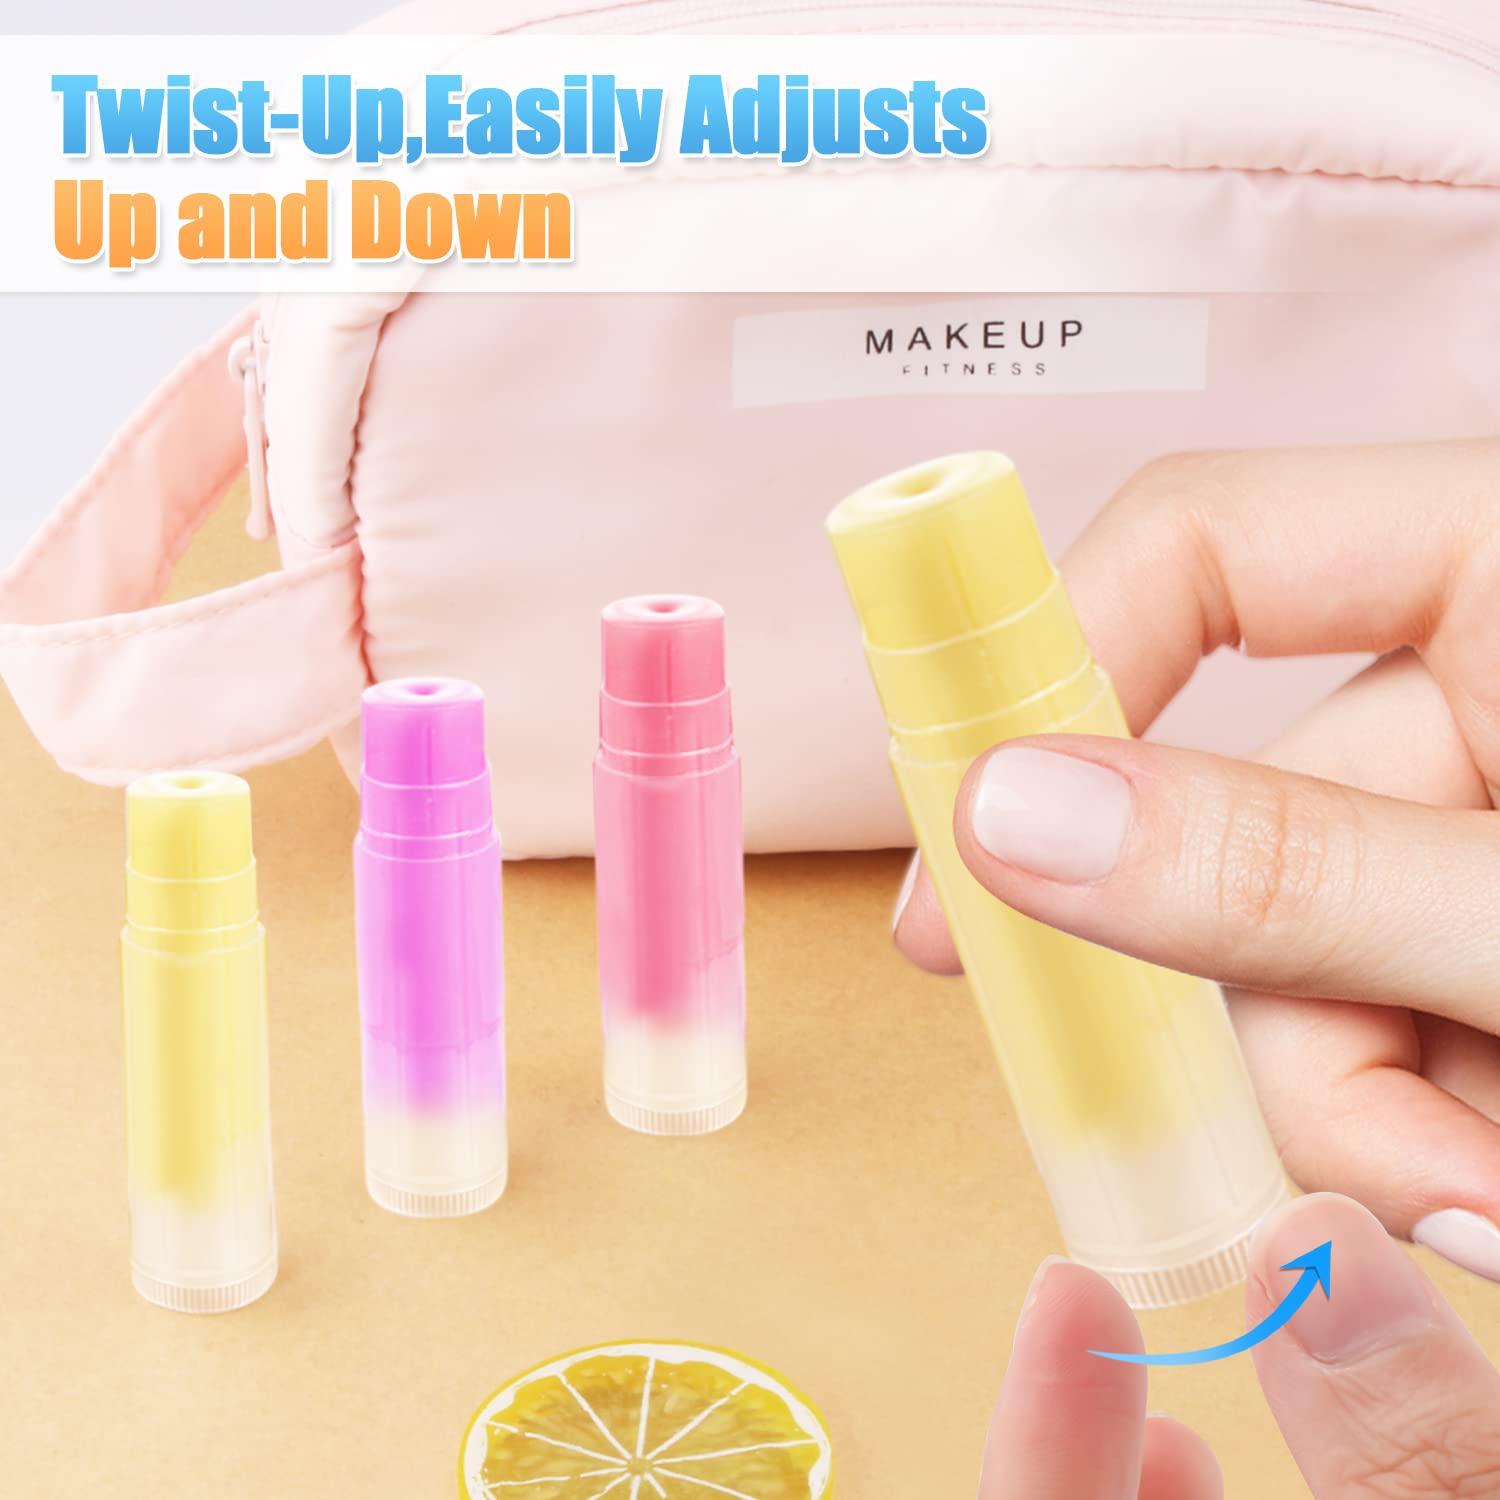 50 Pcs 5.5g Twist-up Lip Balm Tubes,Empty Plastic Lip Gloss Balm Containers Rotatable Deodorant Containers for DIY Homemade Lipsticks, Chapsticks and Homemade Solid Perfume,Clear